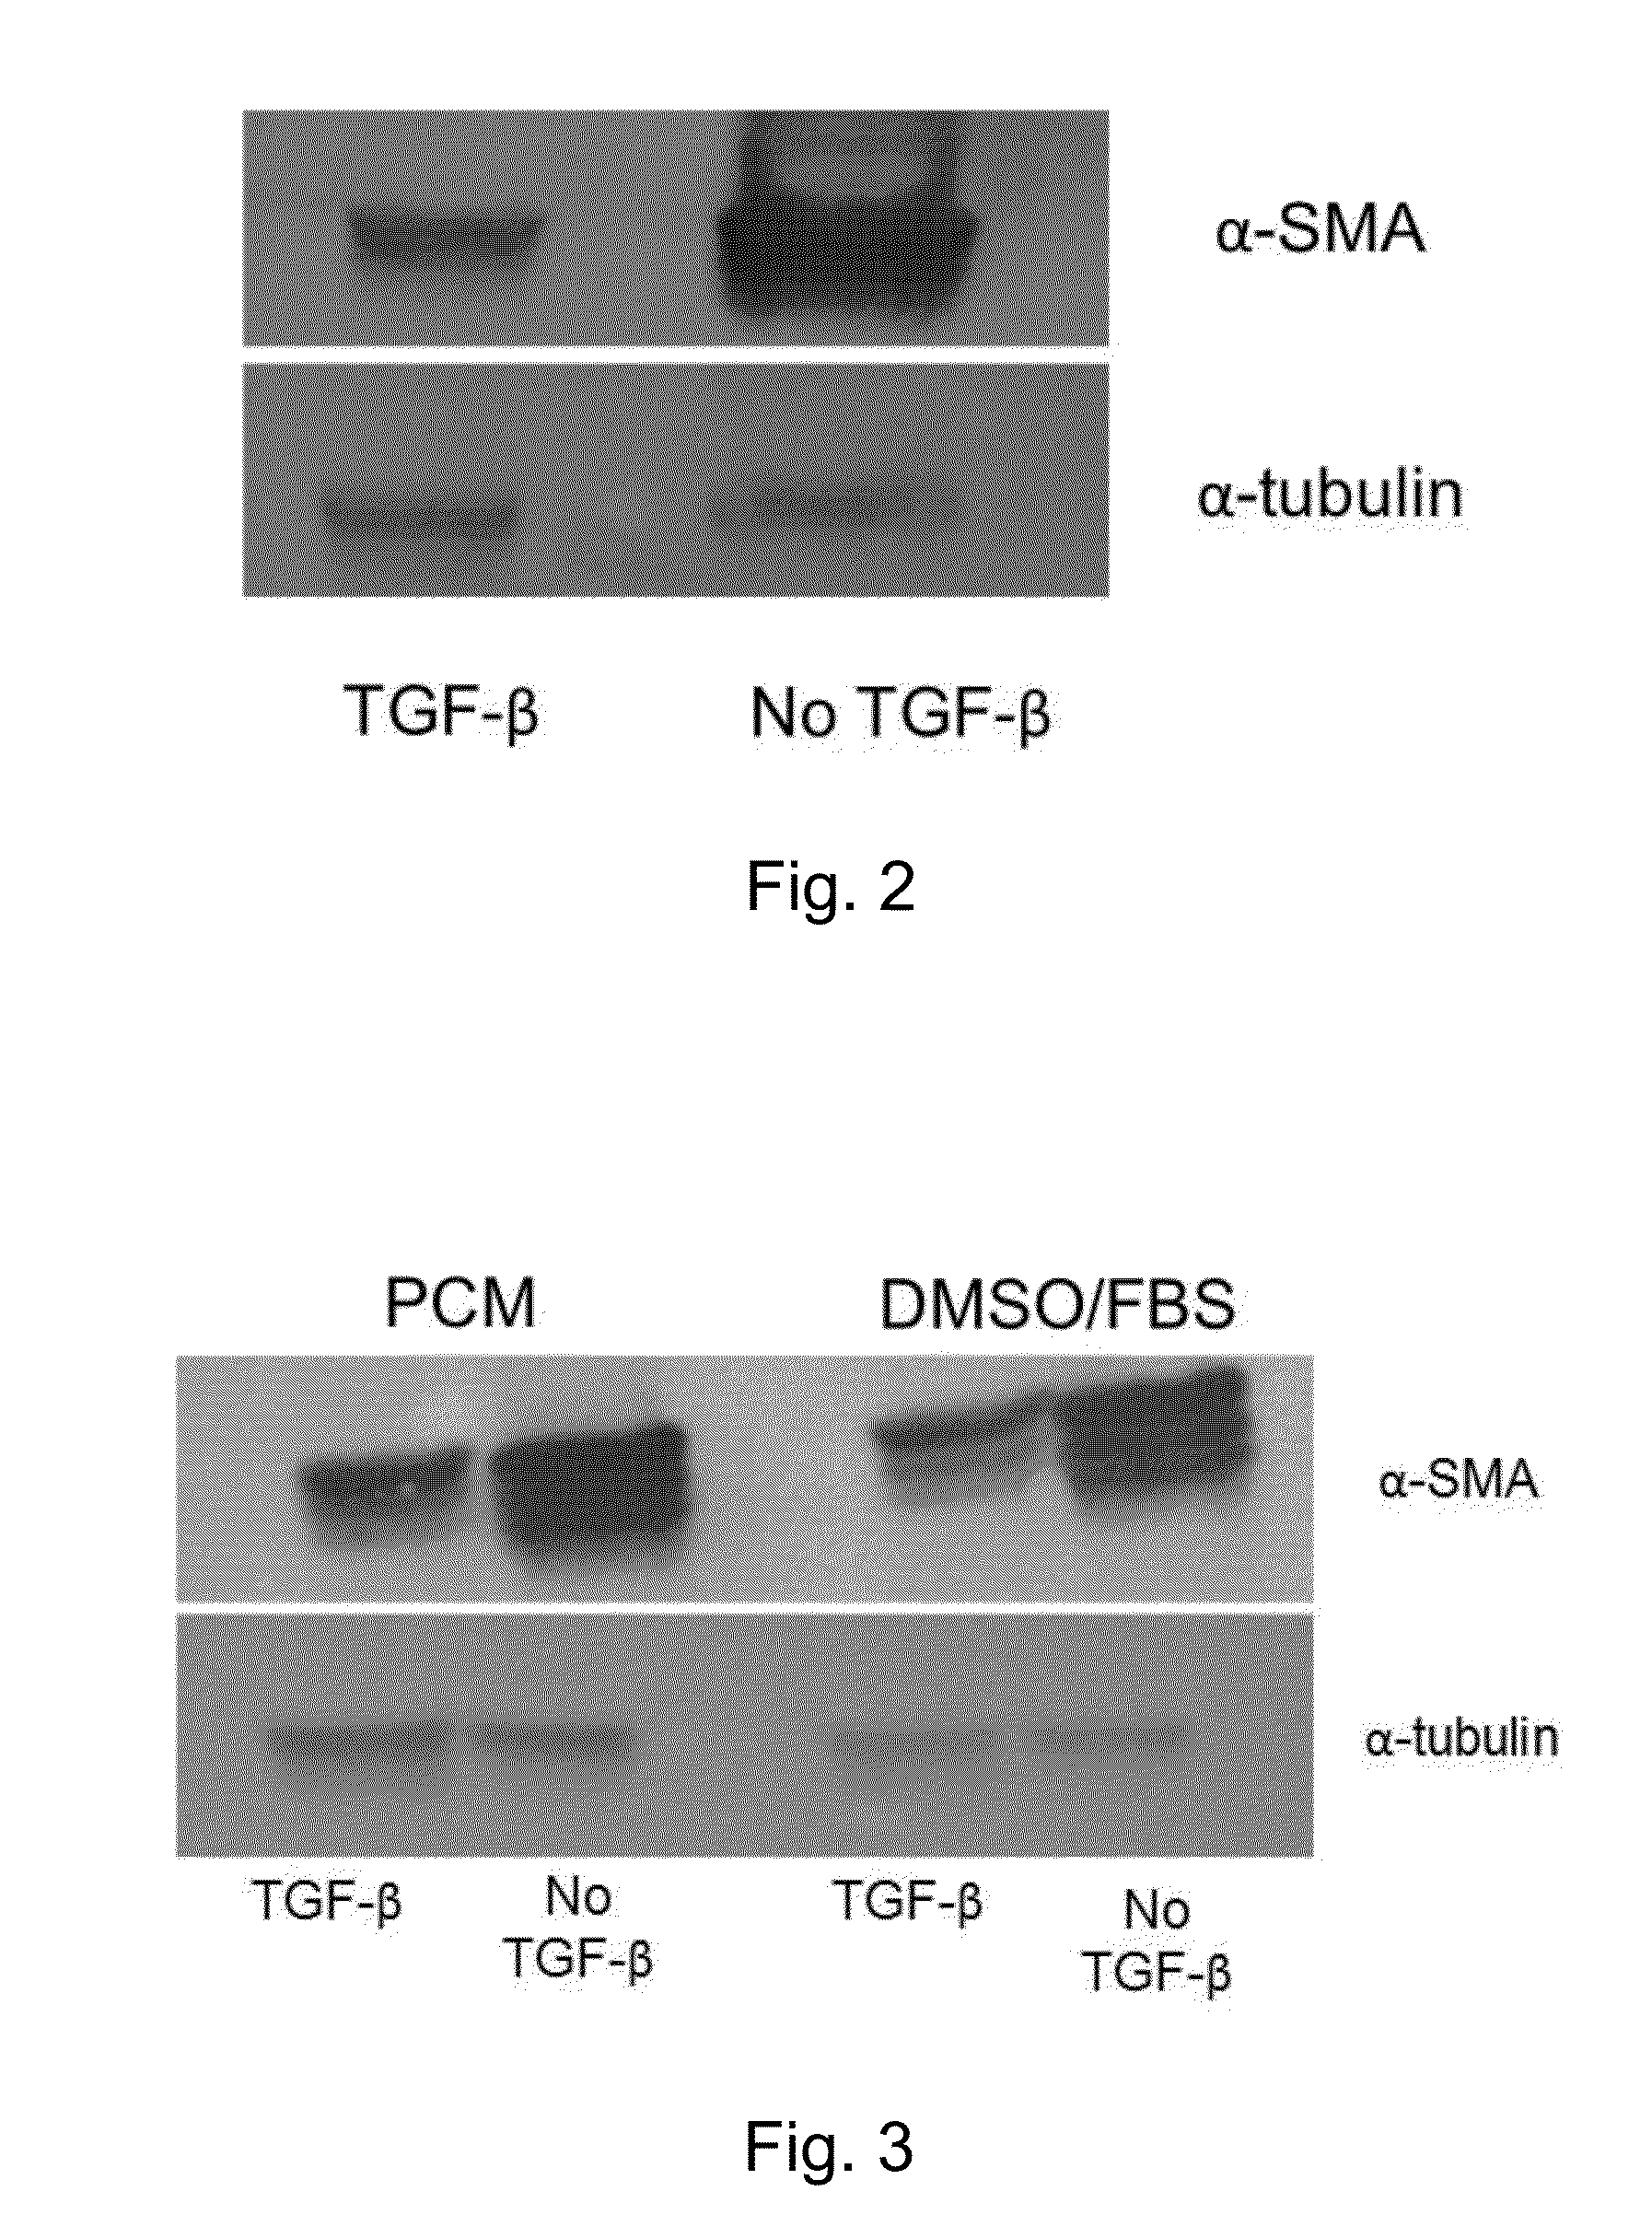 Cryopreservation tools and methods